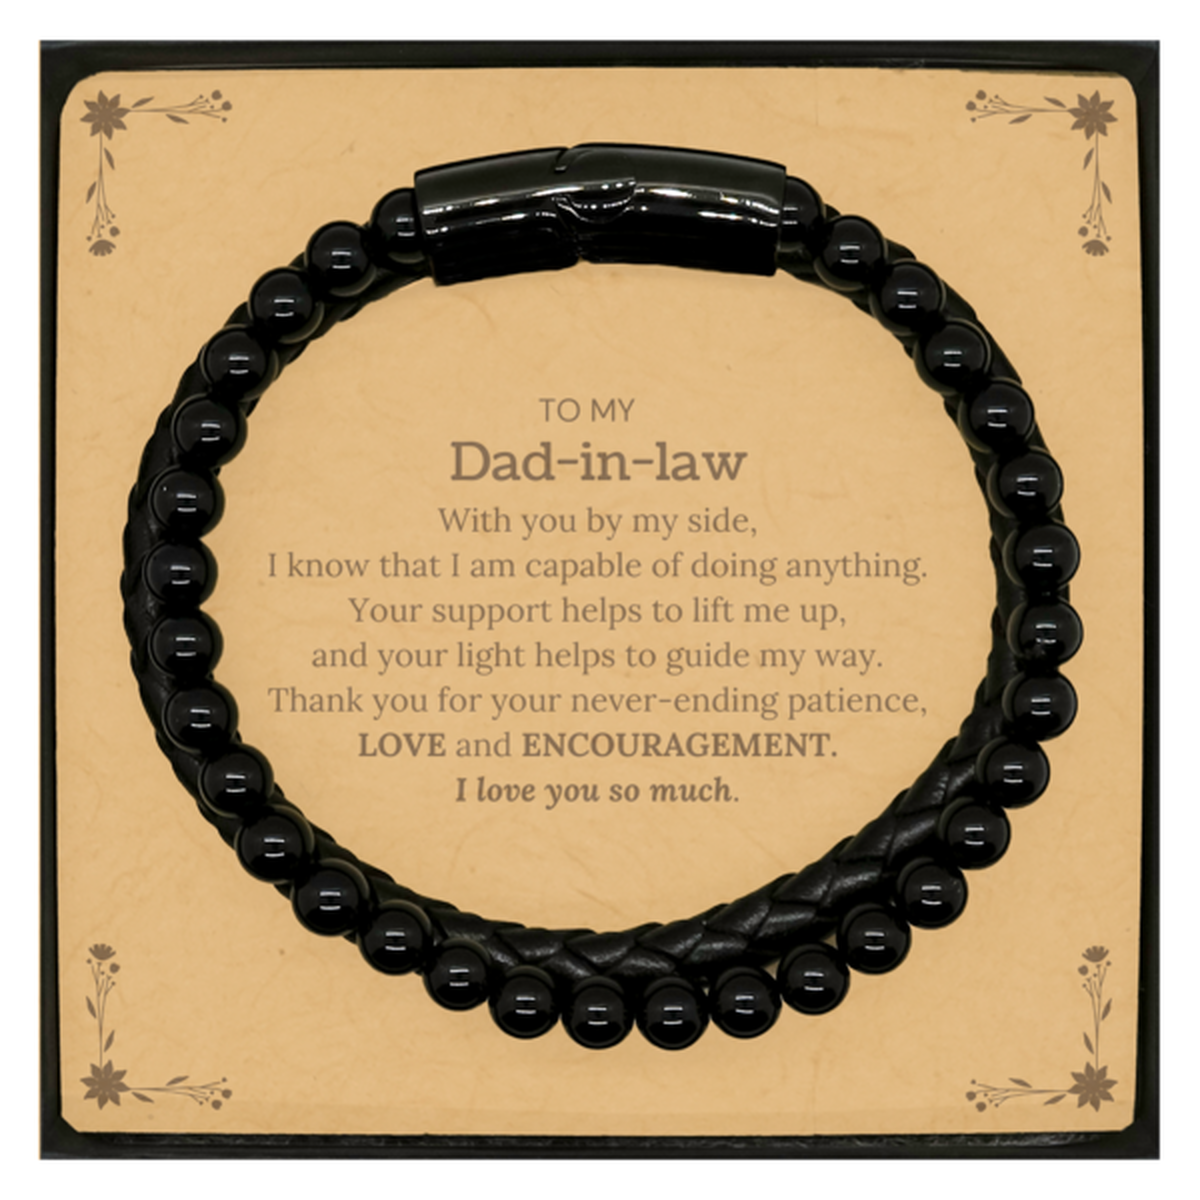 Appreciation Dad-in-law Stone Leather Bracelets Gifts, To My Dad-in-law Birthday Christmas Wedding Keepsake Gifts for Dad-in-law With you by my side, I know that I am capable of doing anything. I love you so much